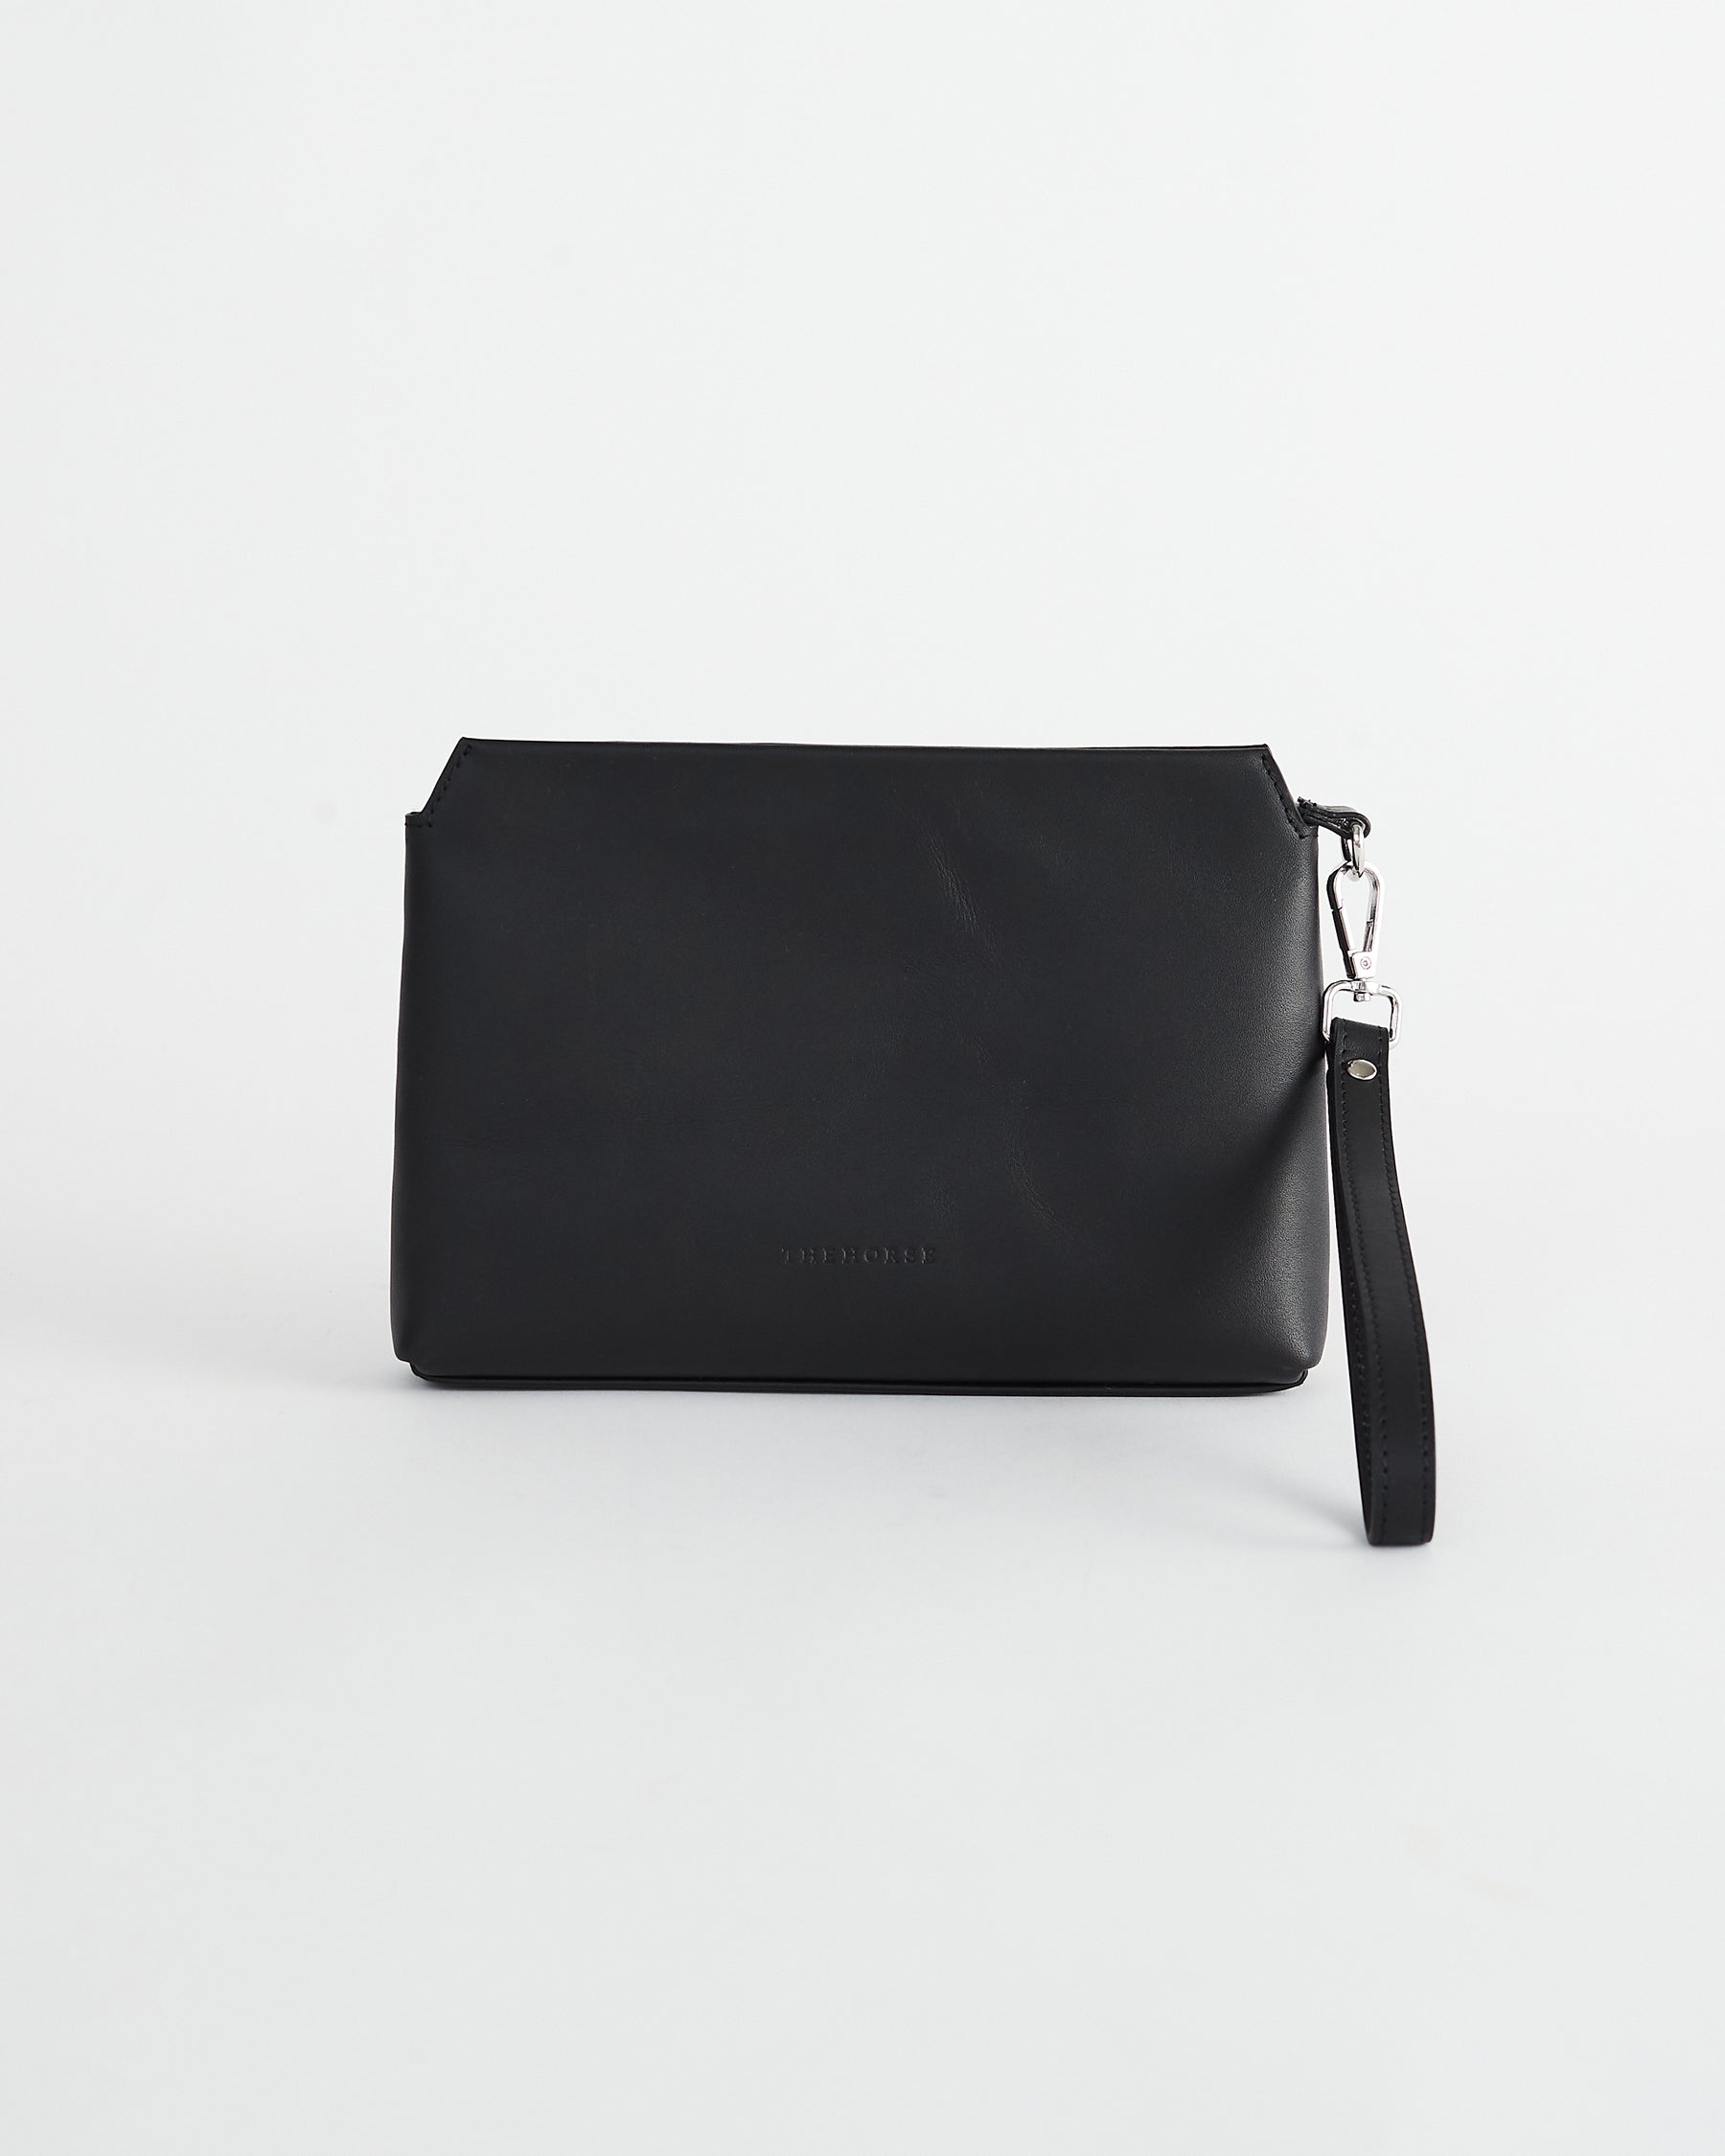 The Lola Smooth Leather Clutch in Black by The Horse®